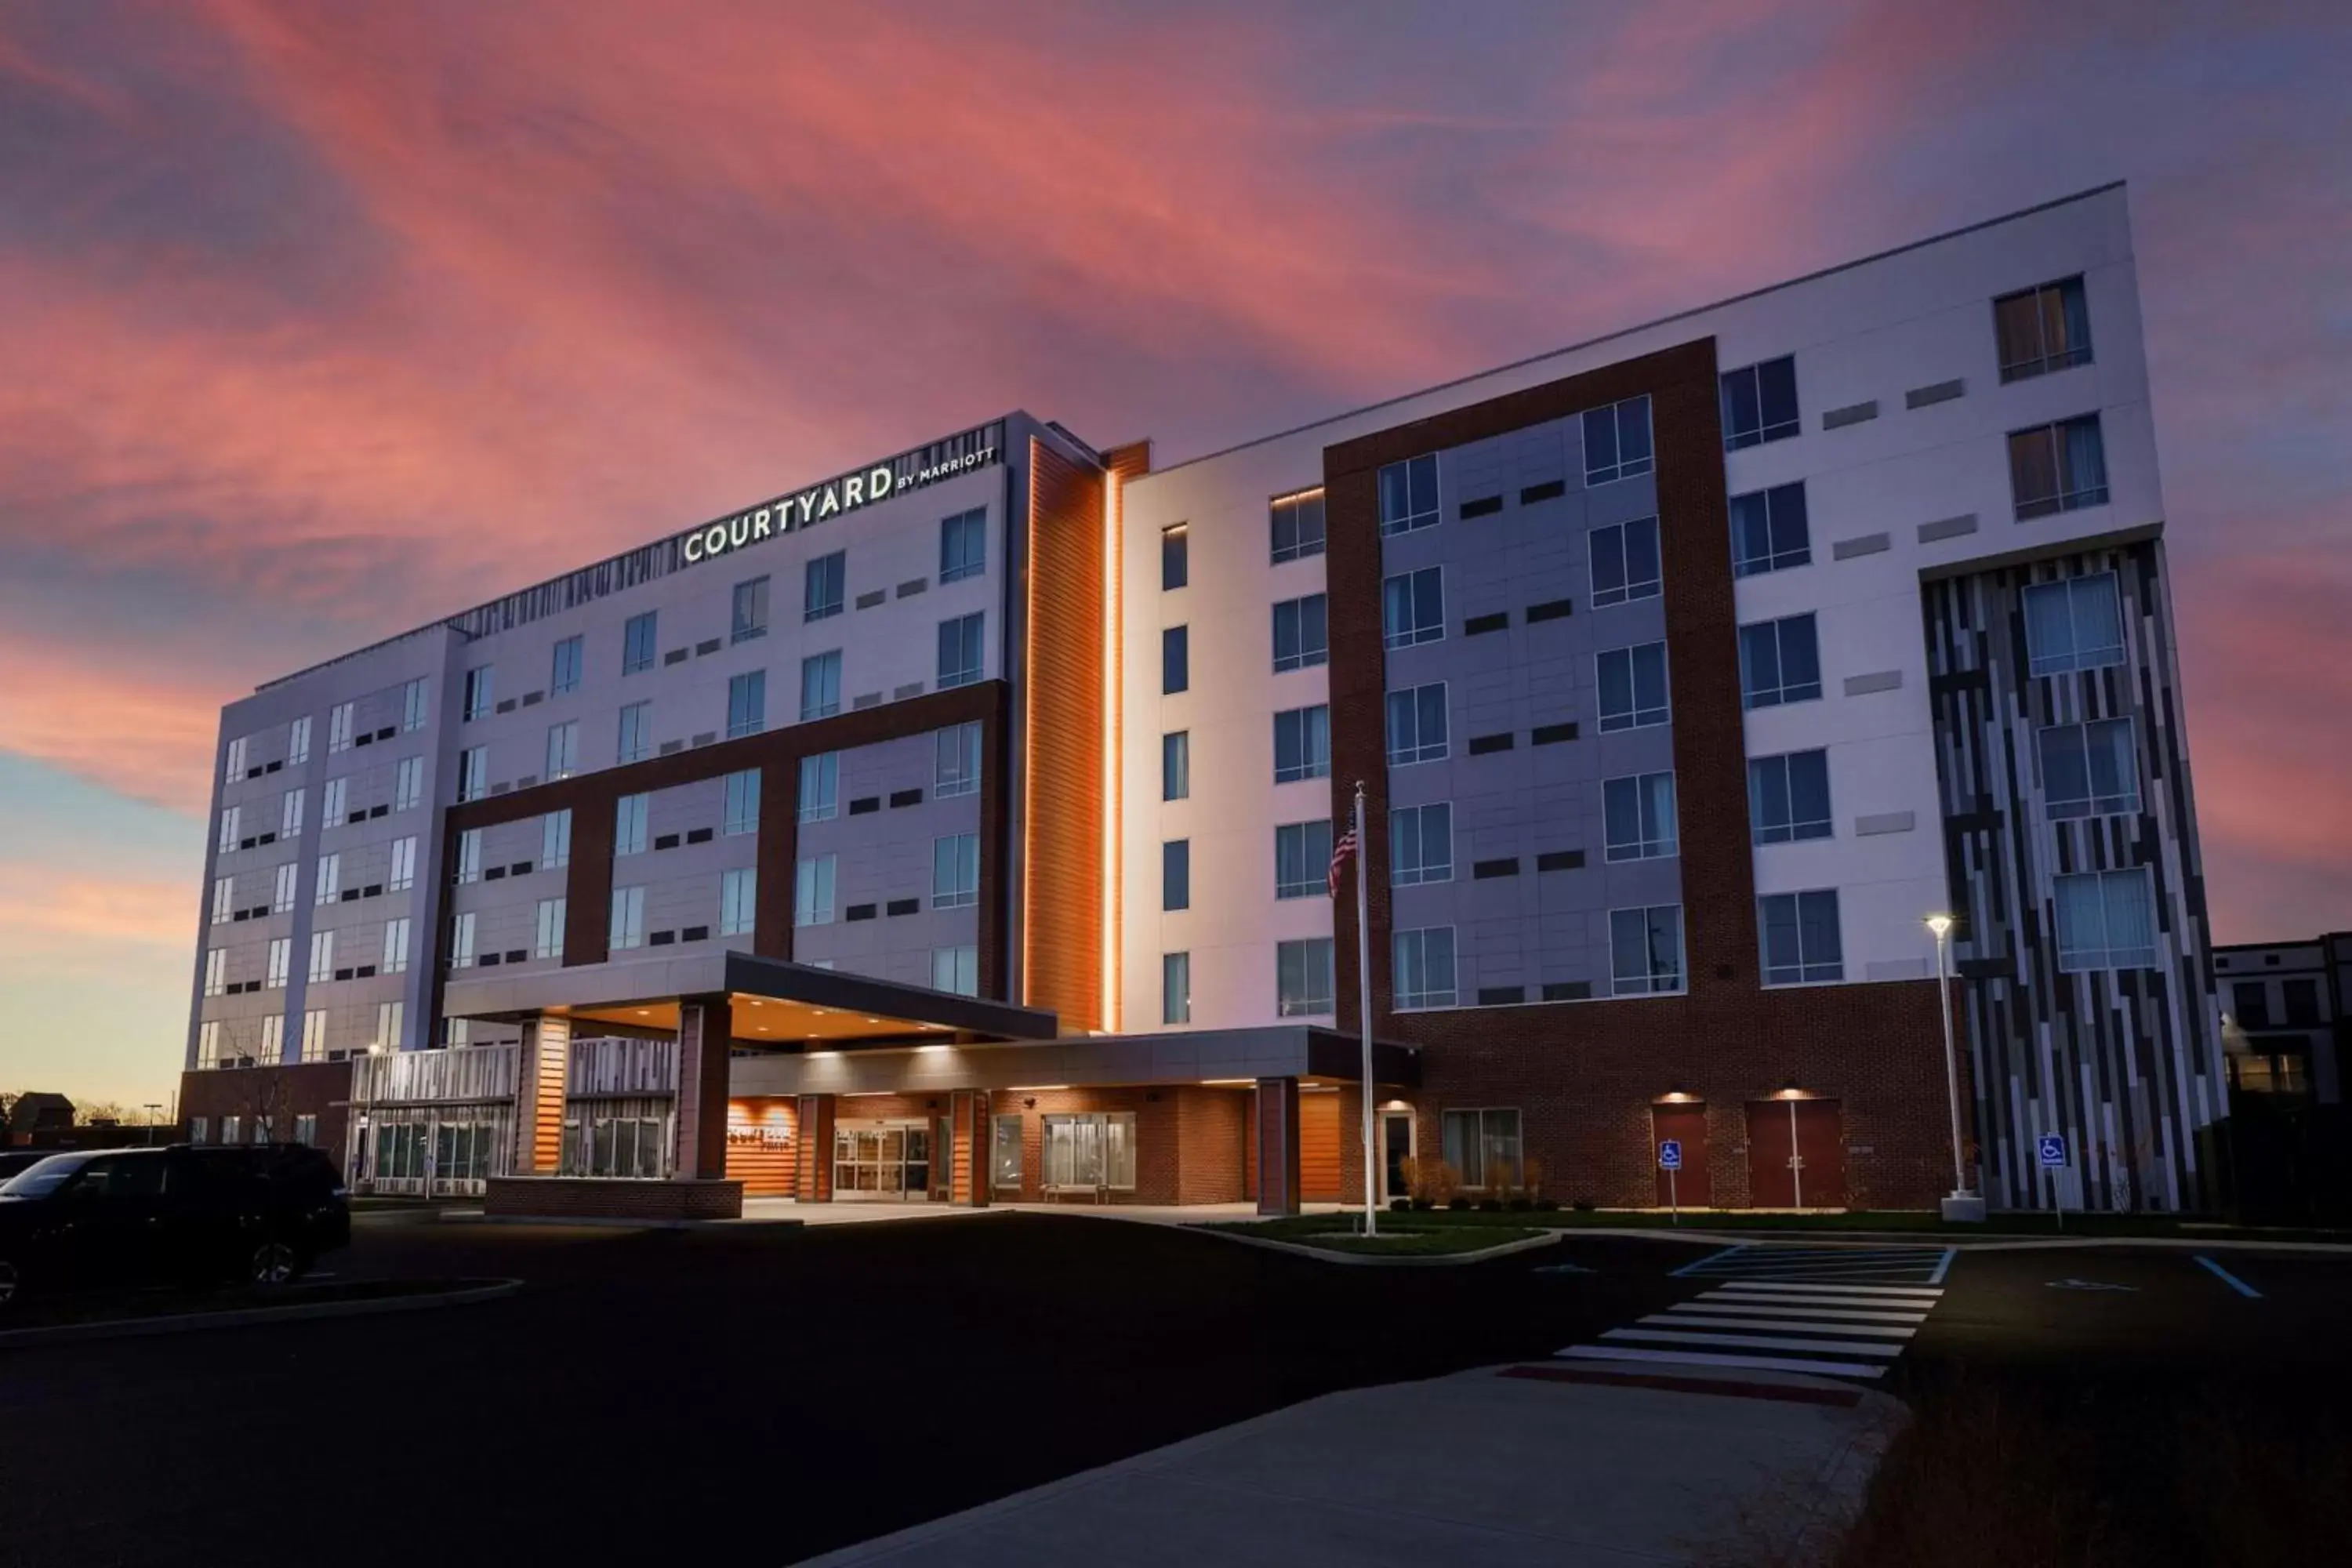 Property Building in Courtyard by Marriott Indianapolis Fishers